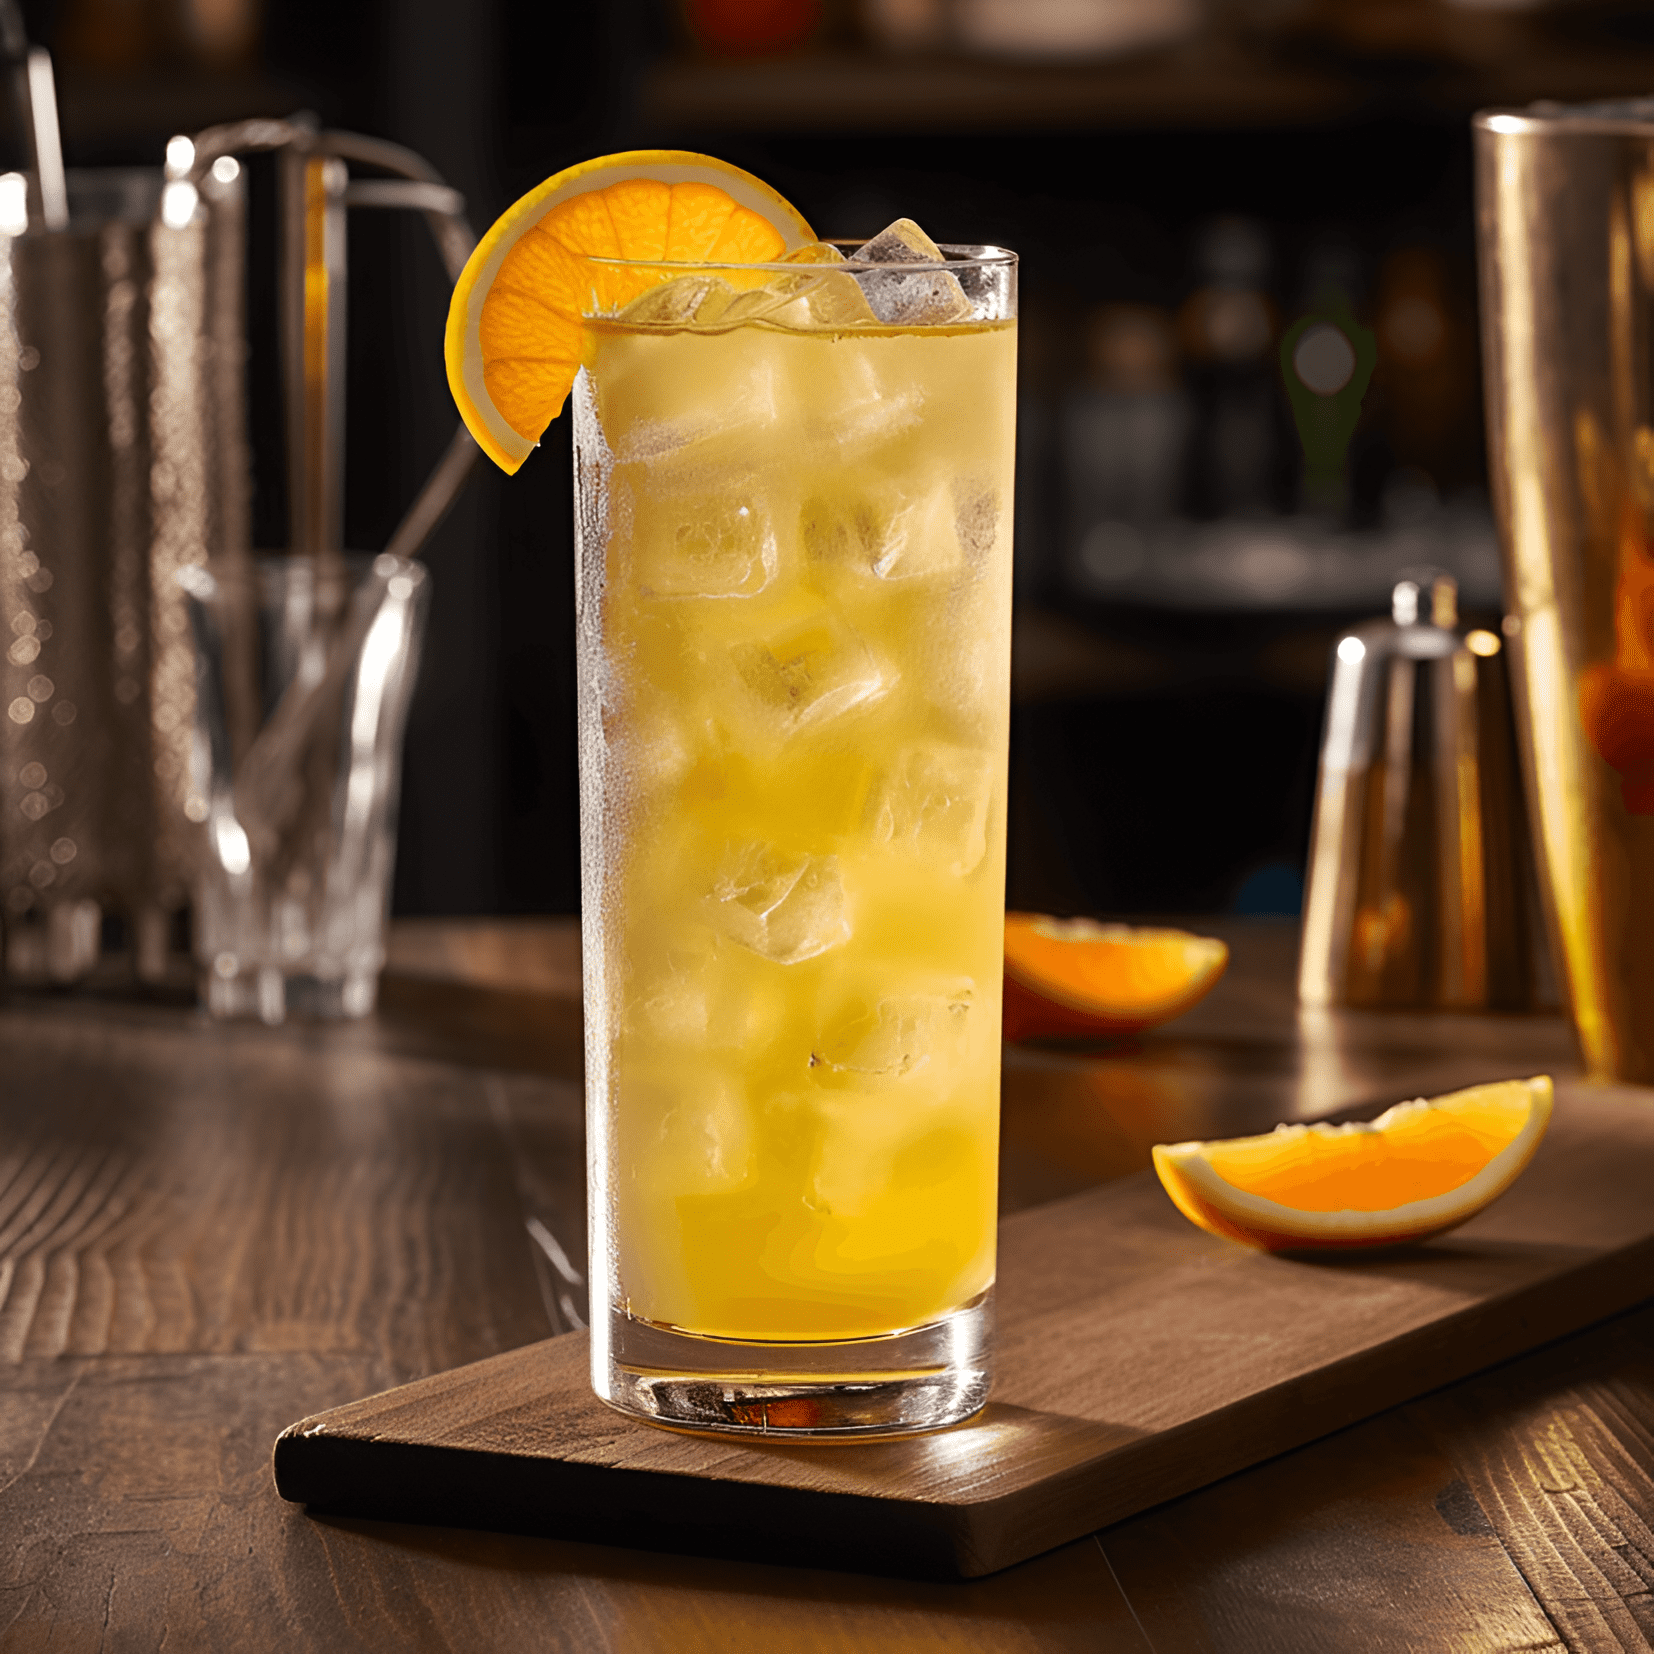 Seaboard Cocktail Recipe - The Seaboard cocktail is a harmonious blend of sweet, sour, and slightly bitter flavors. It has a refreshing and crisp taste with a hint of fruitiness and a smooth, velvety finish.